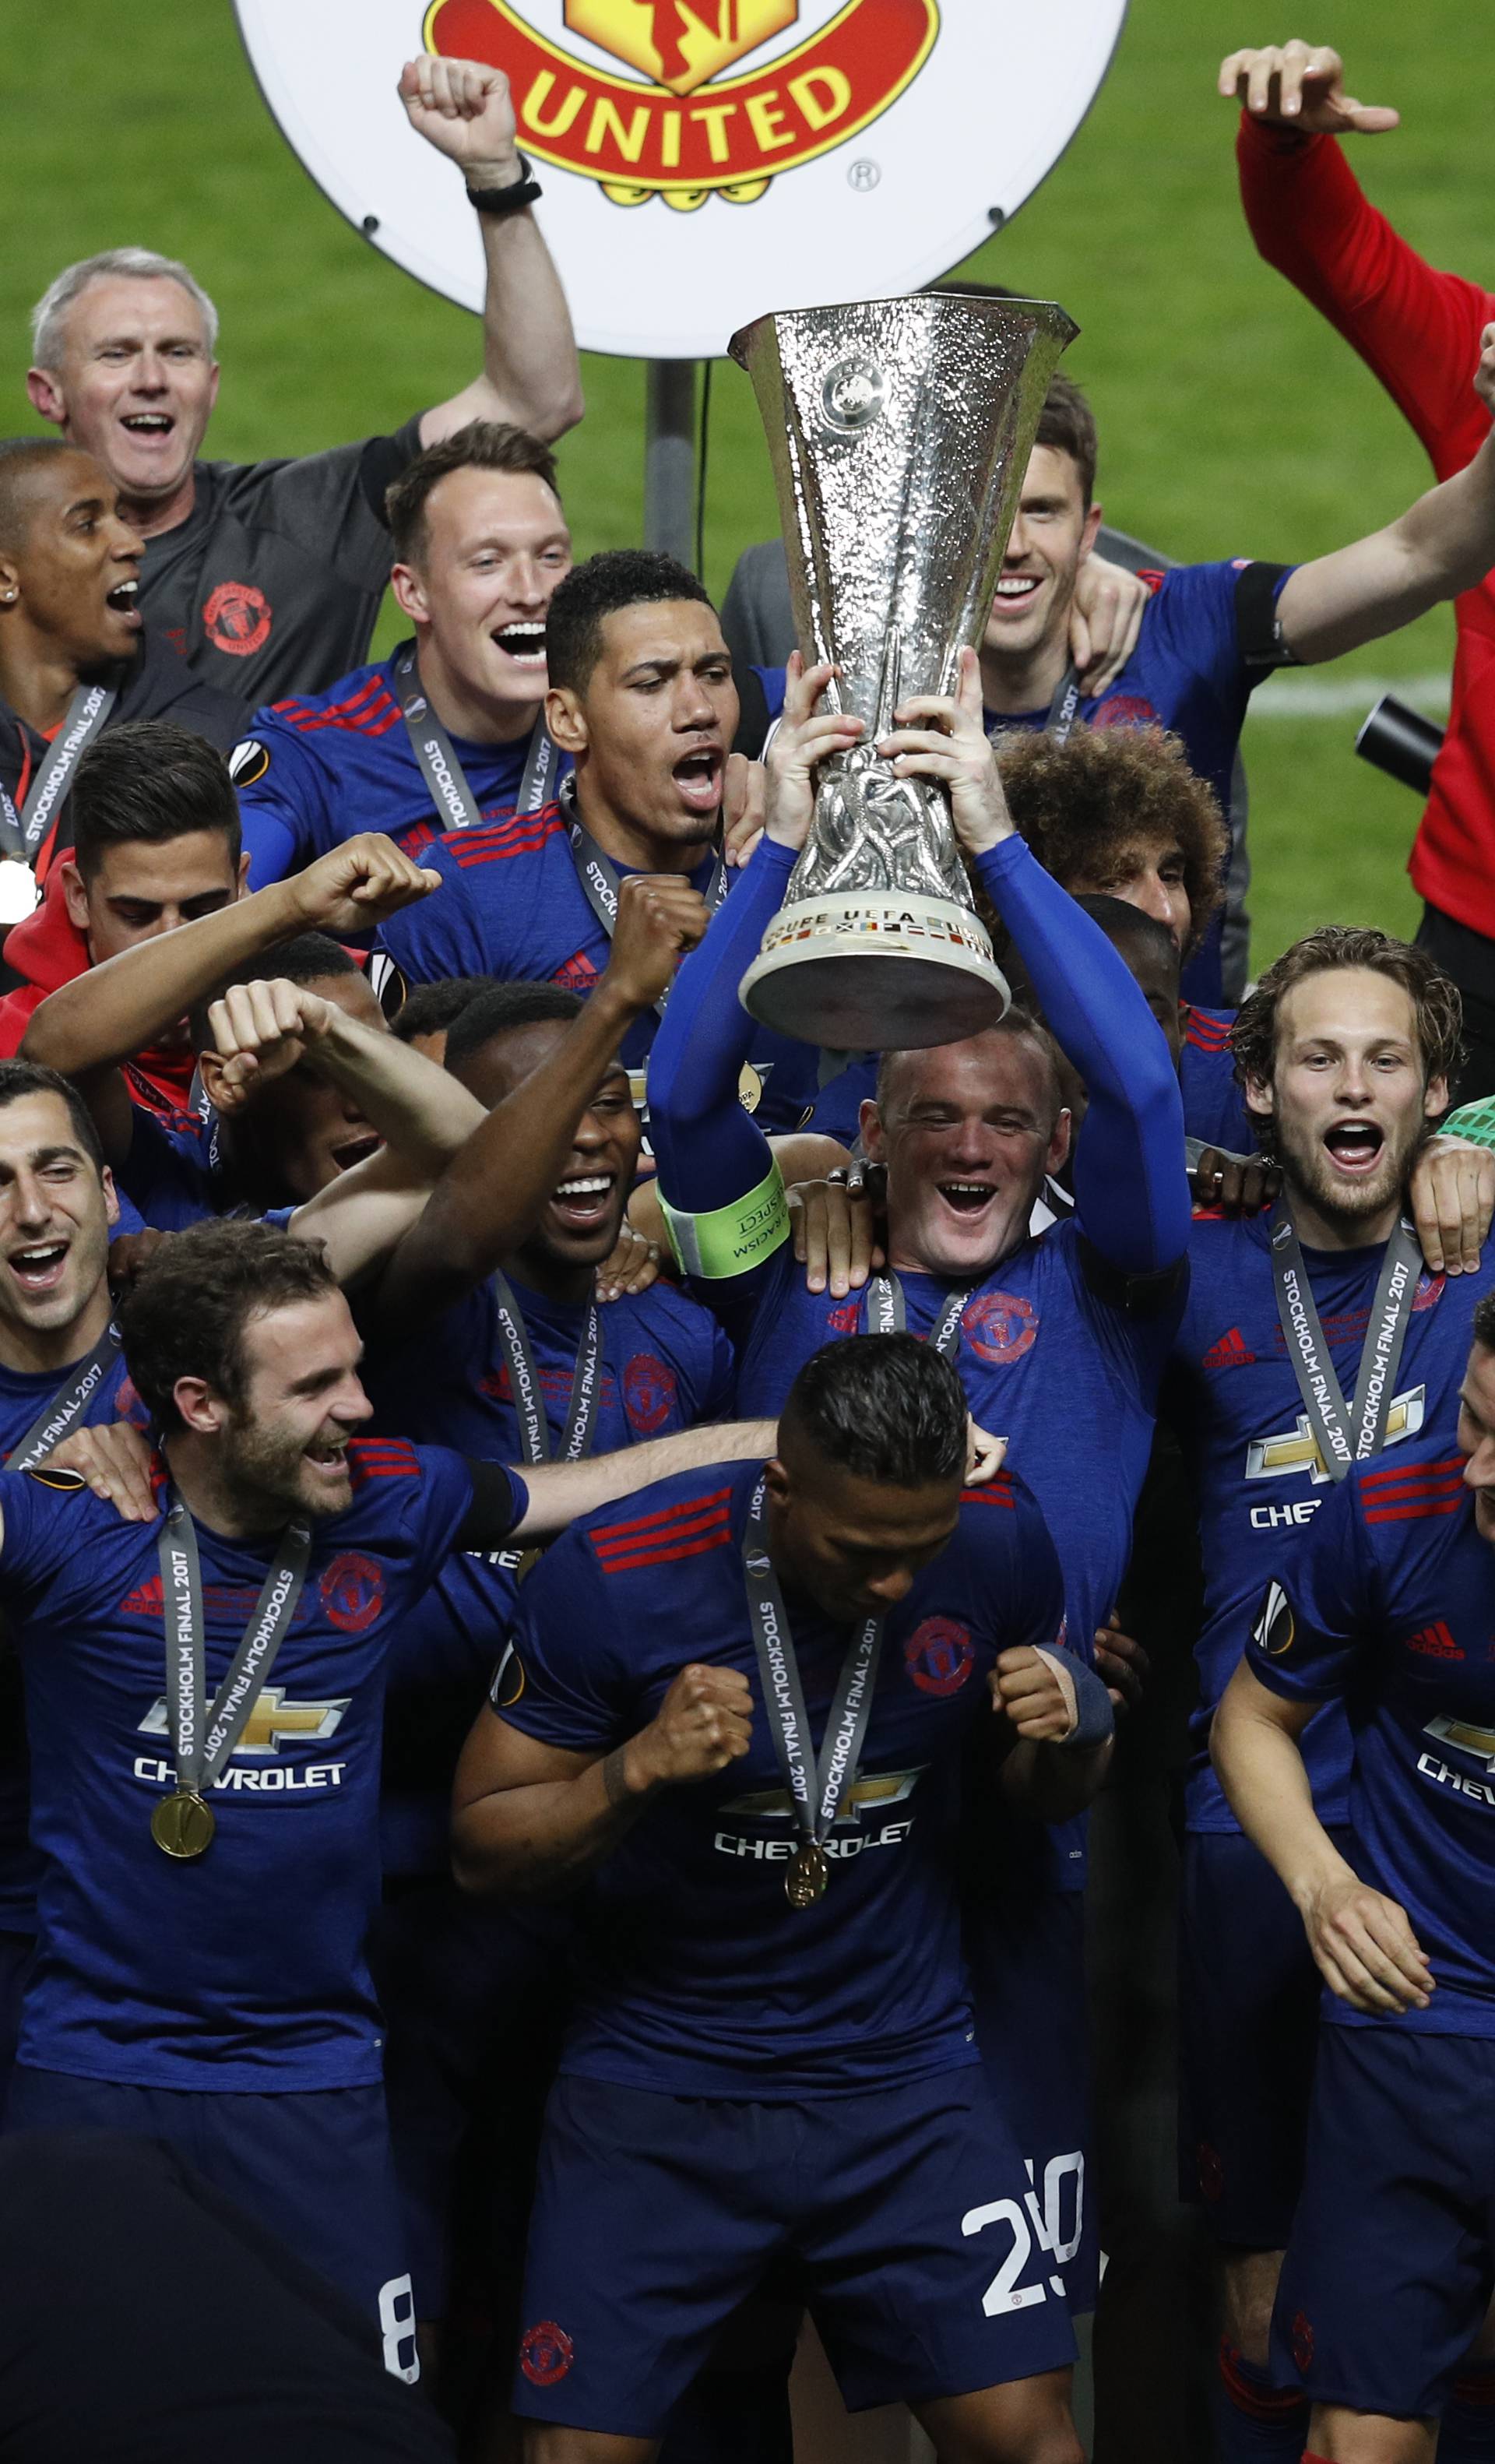 Manchester United's Wayne Rooney lifts the trophy